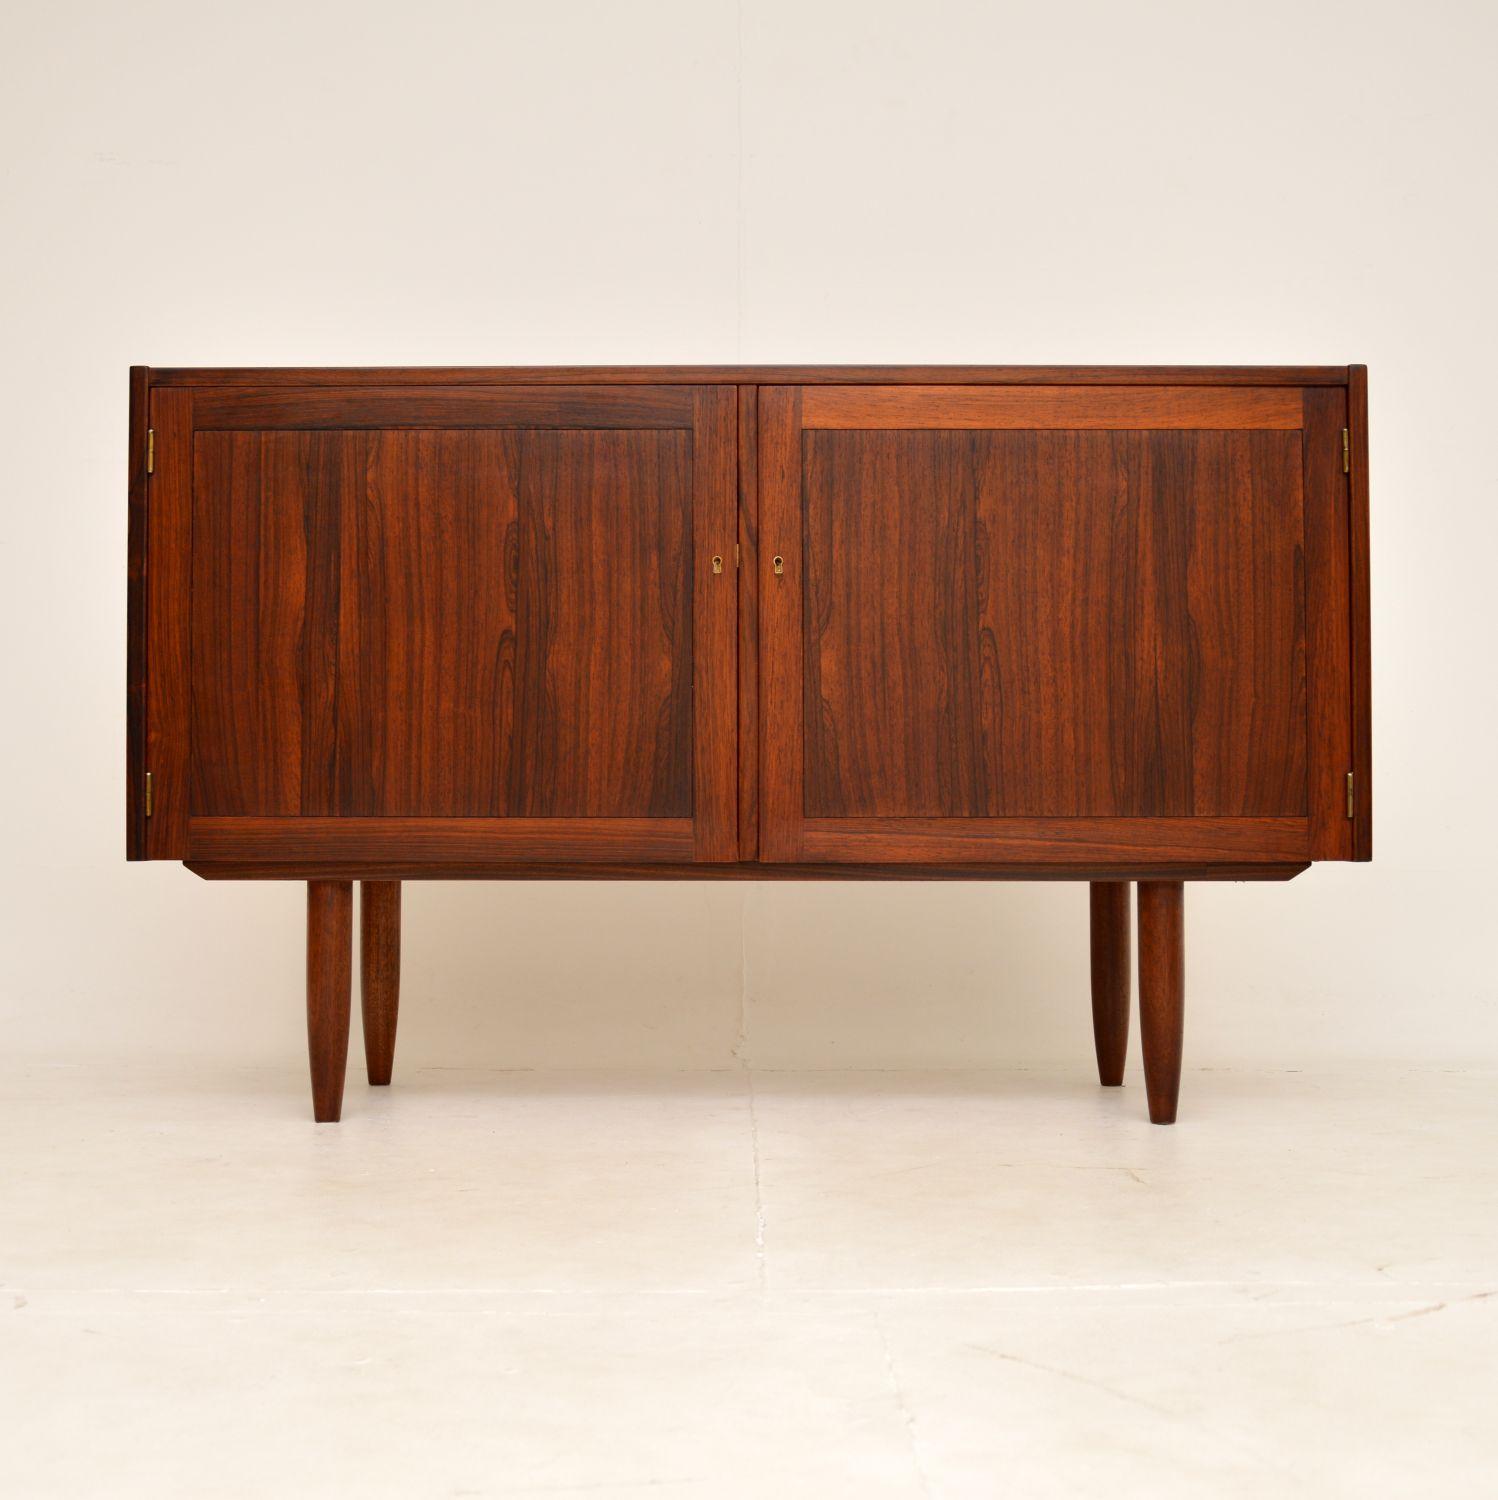 A very stylish and well made vintage sideboard. This was made in Sweden, it was designed by Nils Jonsson and made by Troeds.

It is of lovely quality, with beautiful grain patterns and a gorgeous colour tone. The interior is lined with